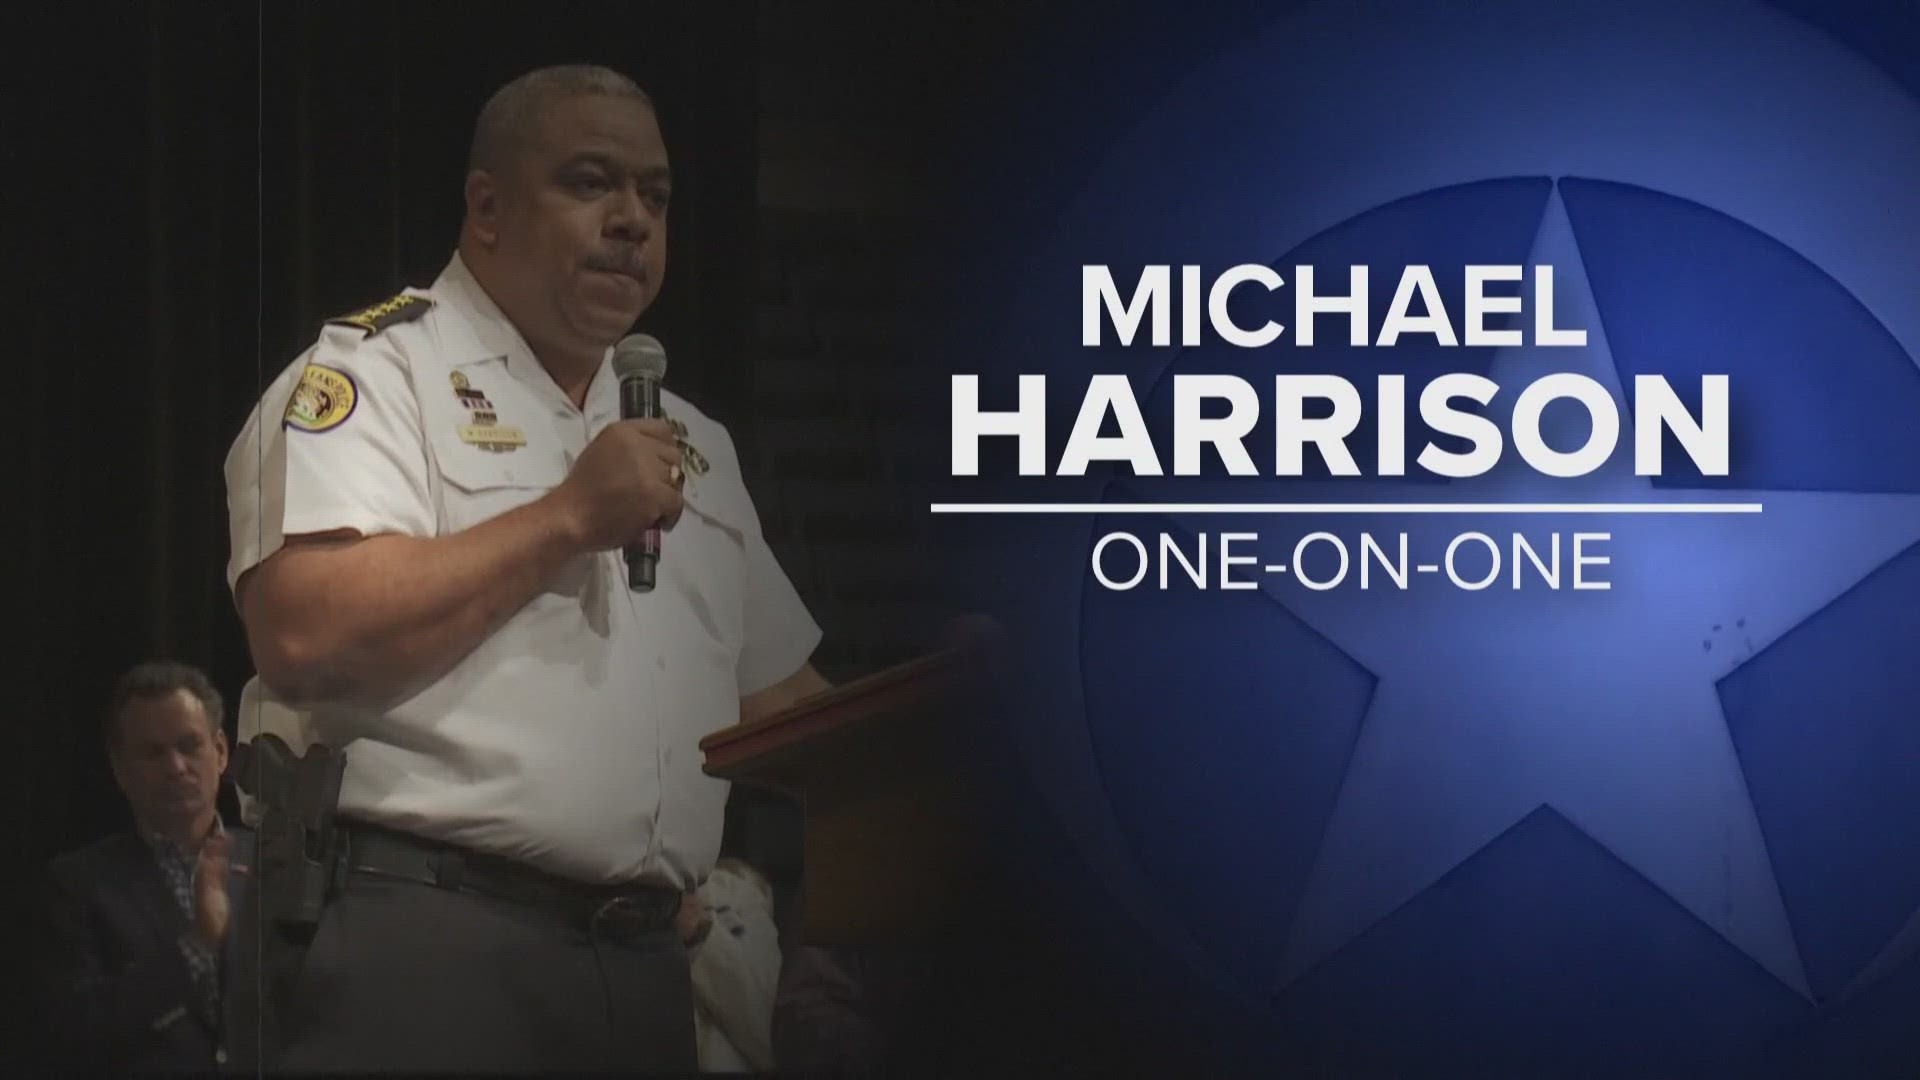 “I’m the only chief in the country to have led two police departments under federal consent decree.." Harrison said.